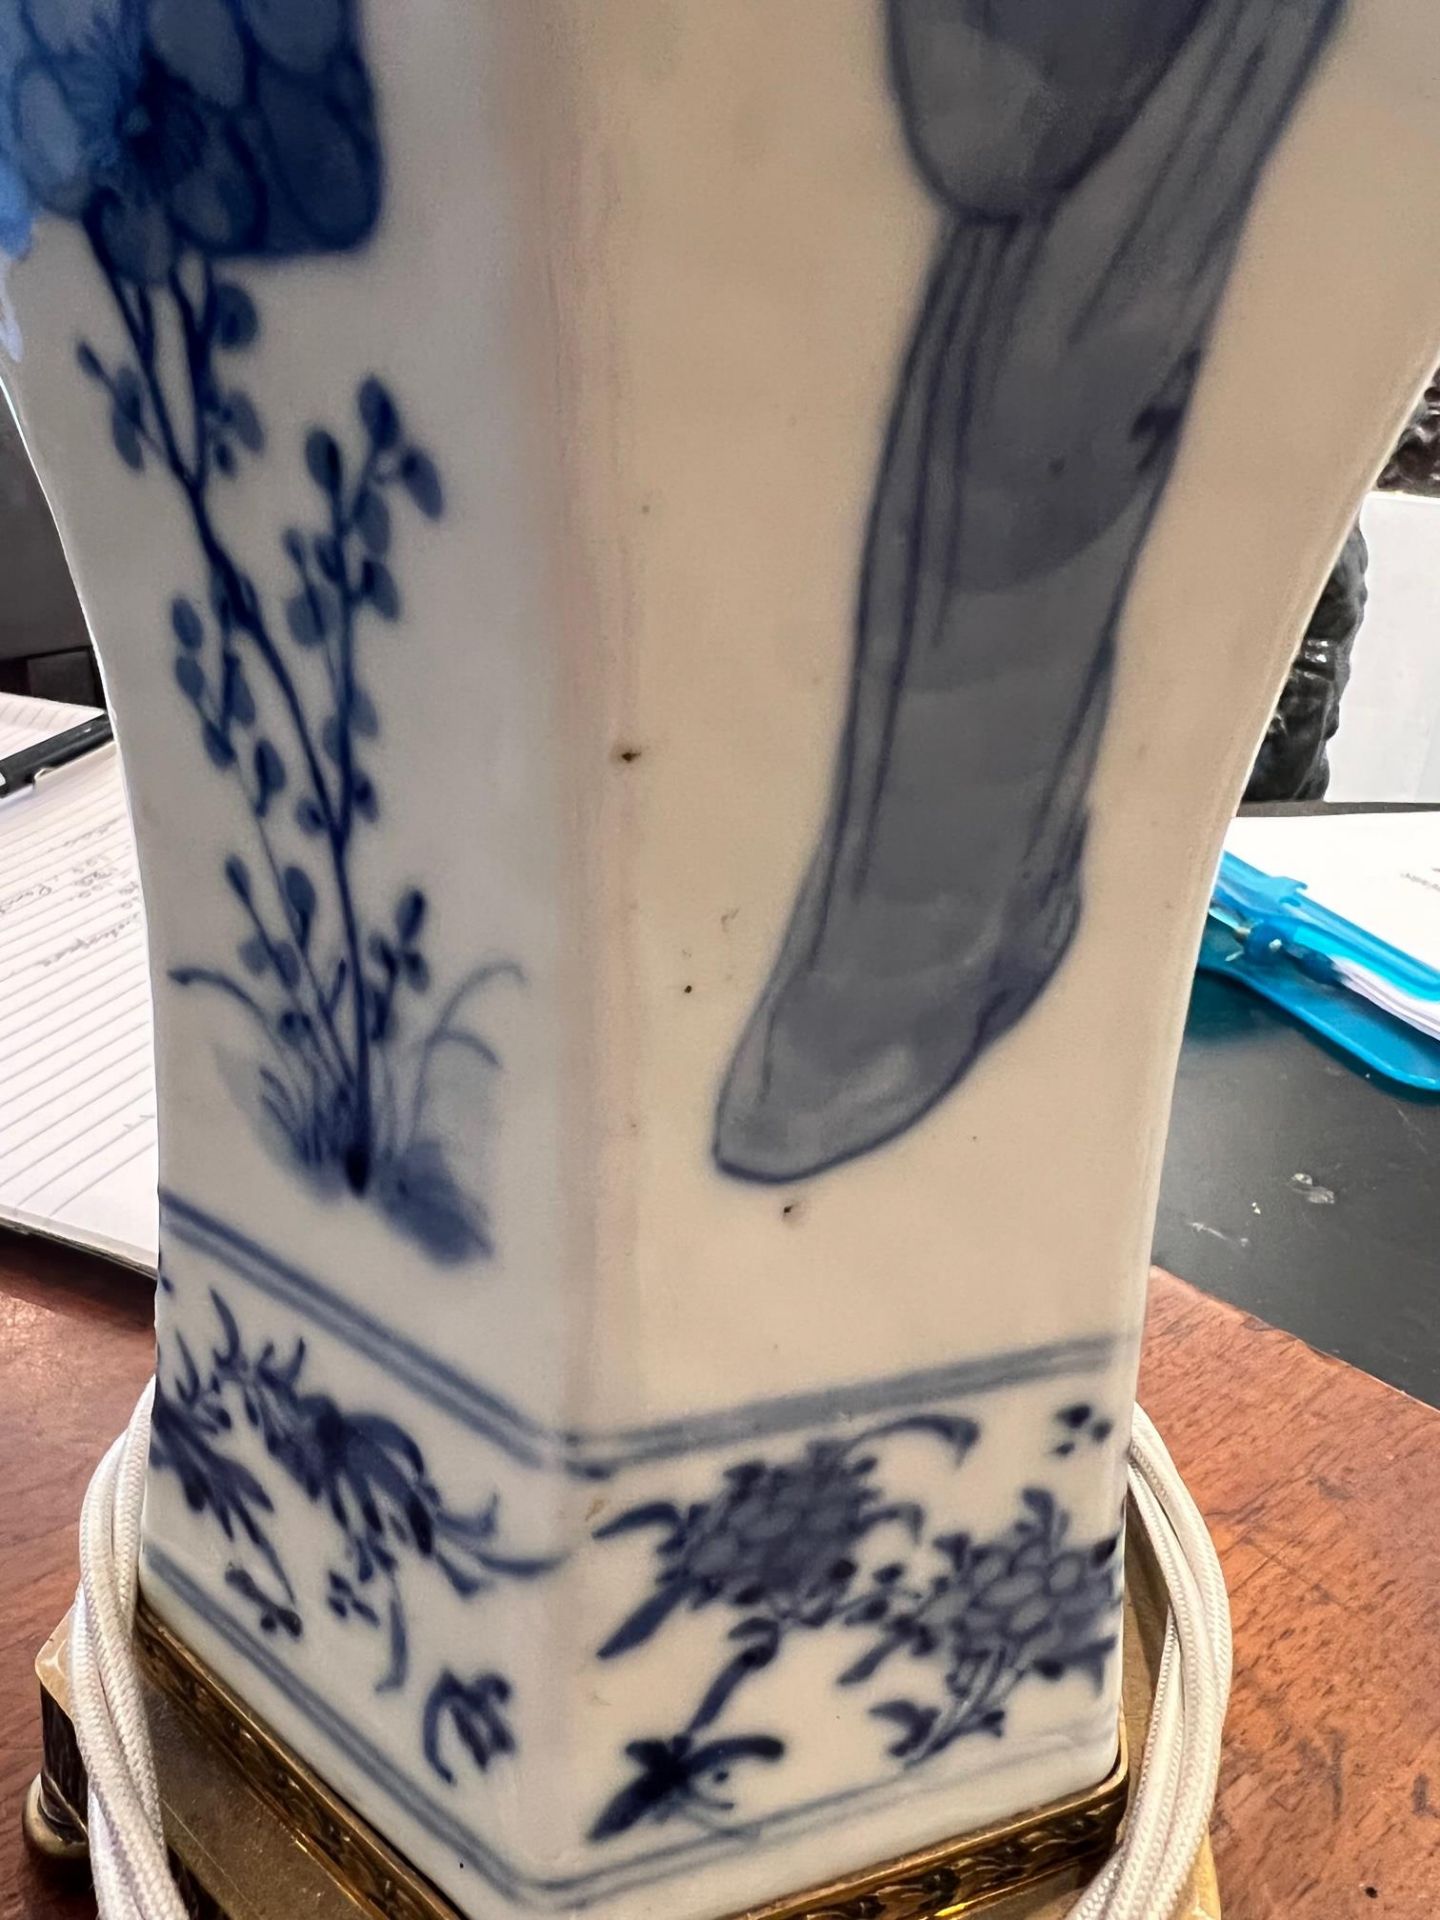 A 19TH CENTURY CHINESE BLUE AND WHITE PORCELAIN VASE ADAPTED AS A LAMP BASE - Image 3 of 8